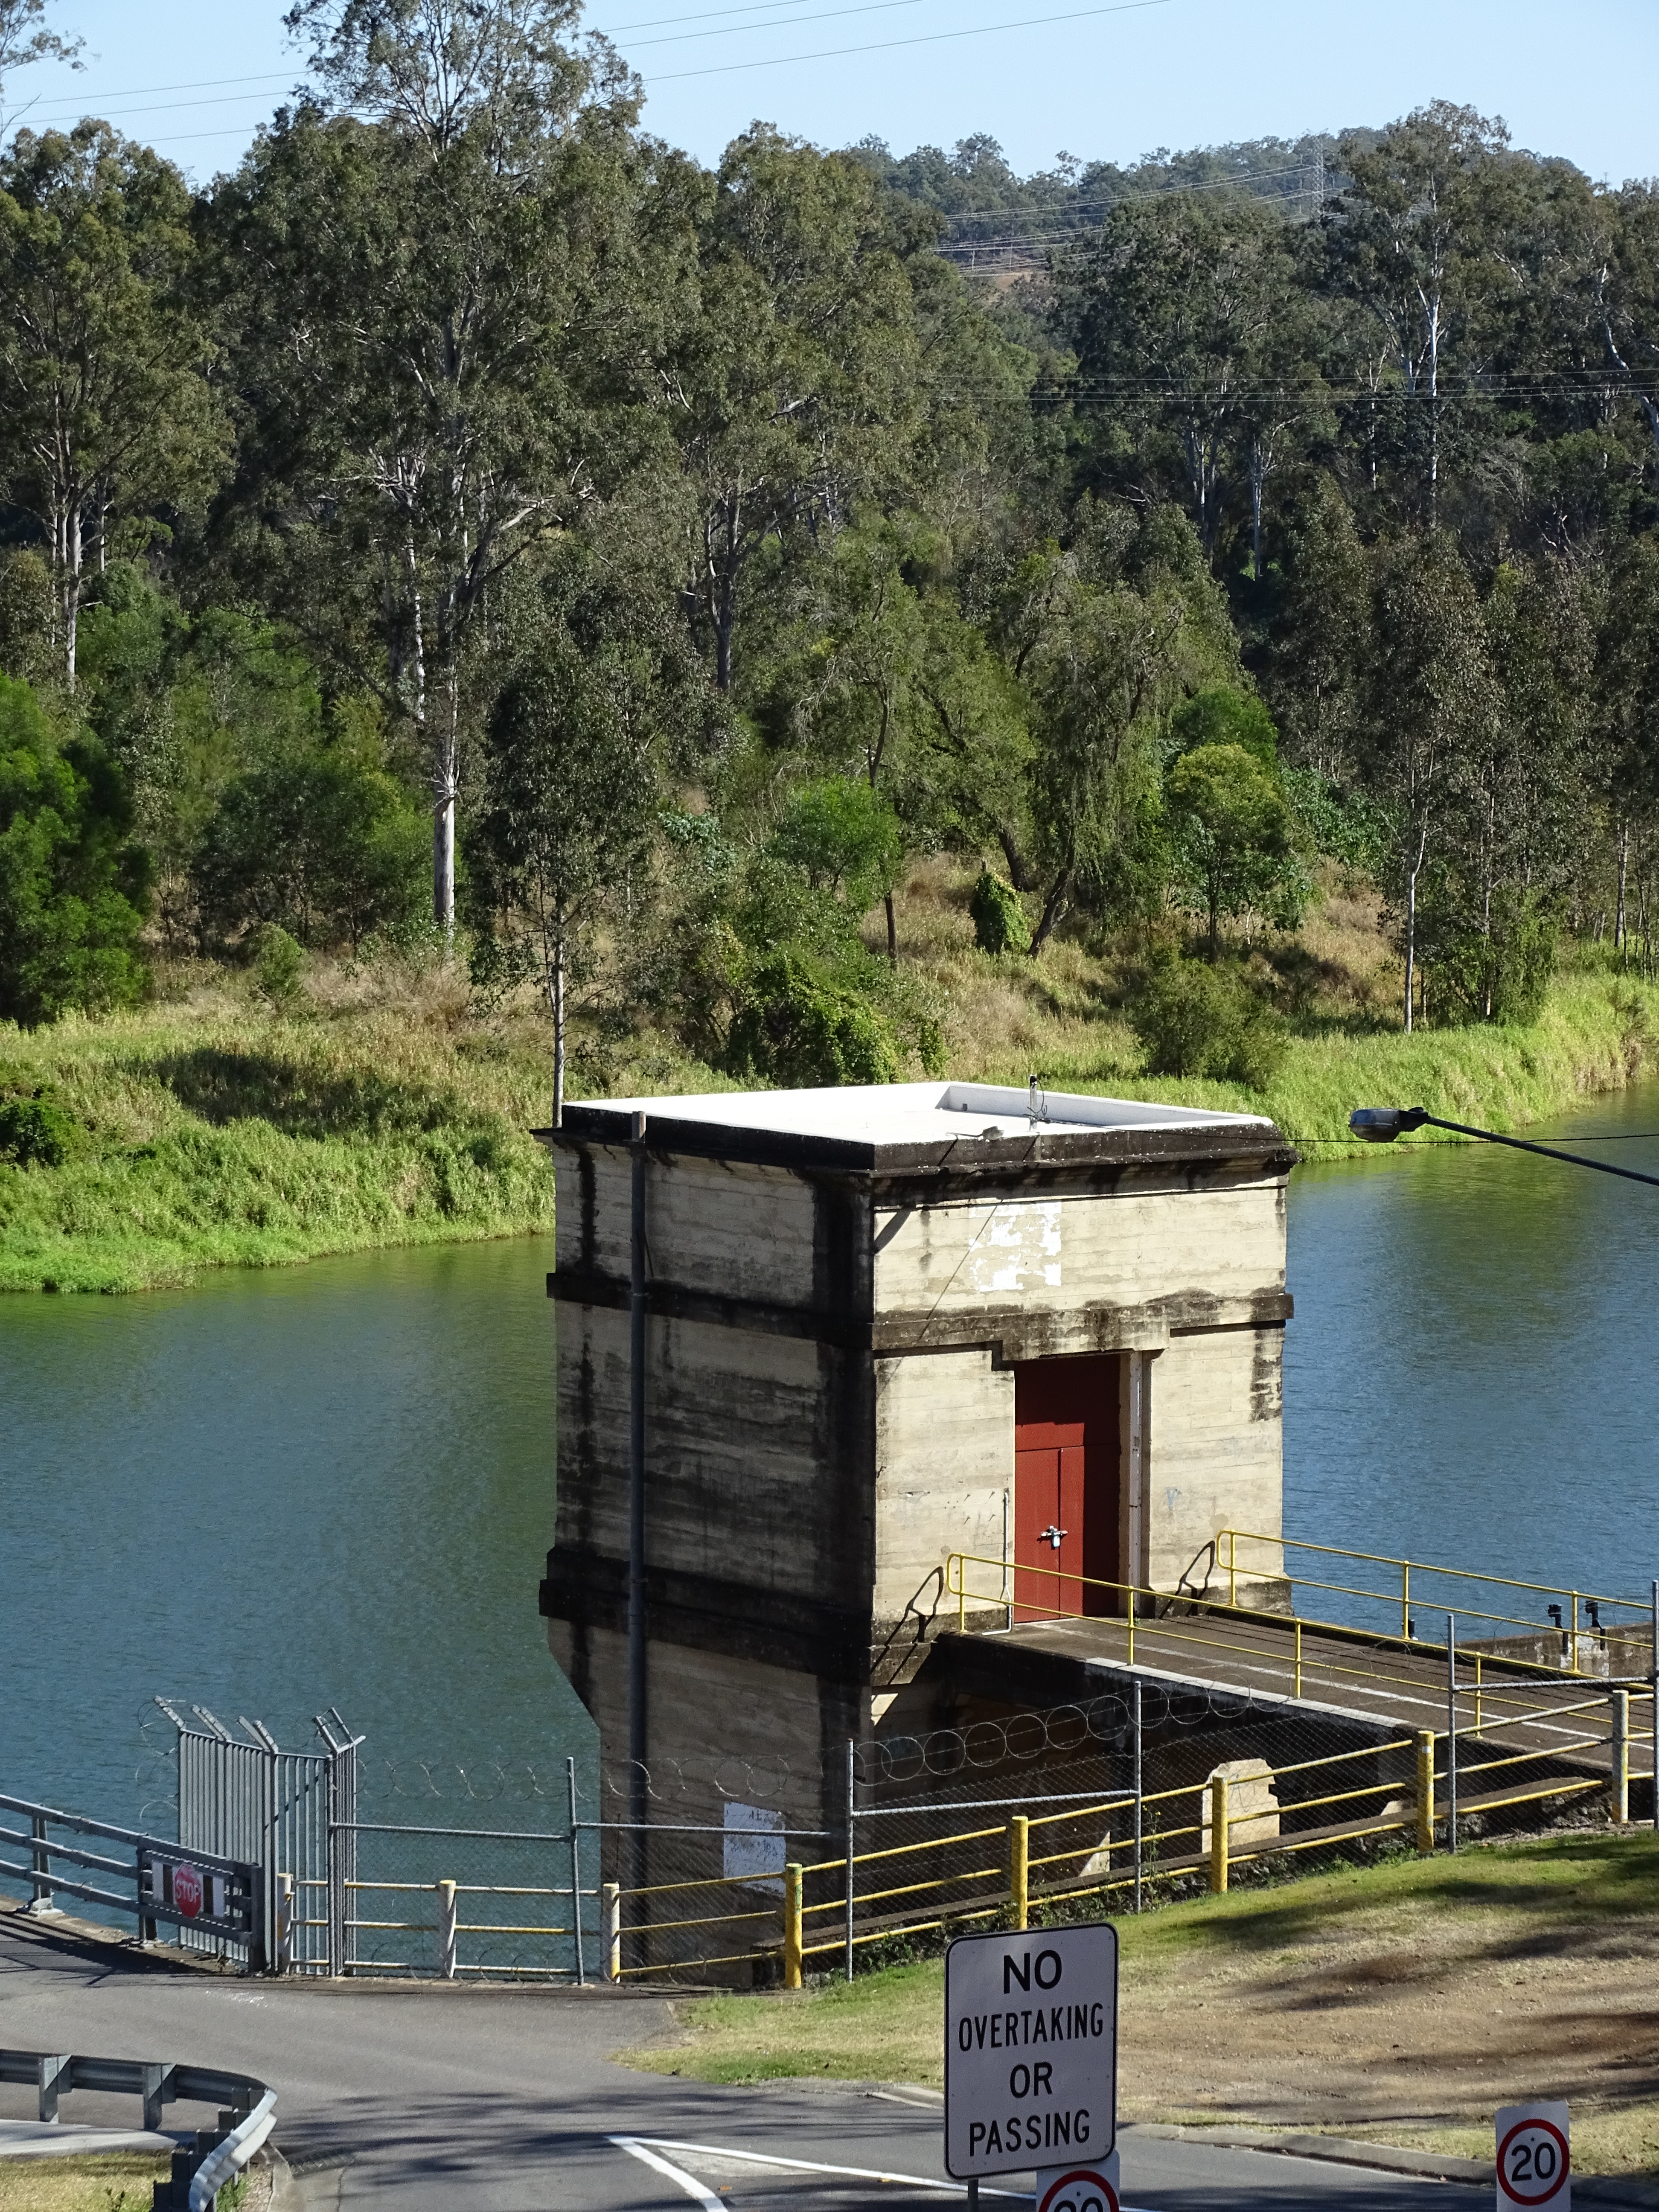 This is an image of the Water Intake Tower on the eastern side of the Mt Crosby Weir, part of the local heritage place known as Mt Crosby Weir & Old Foundations.